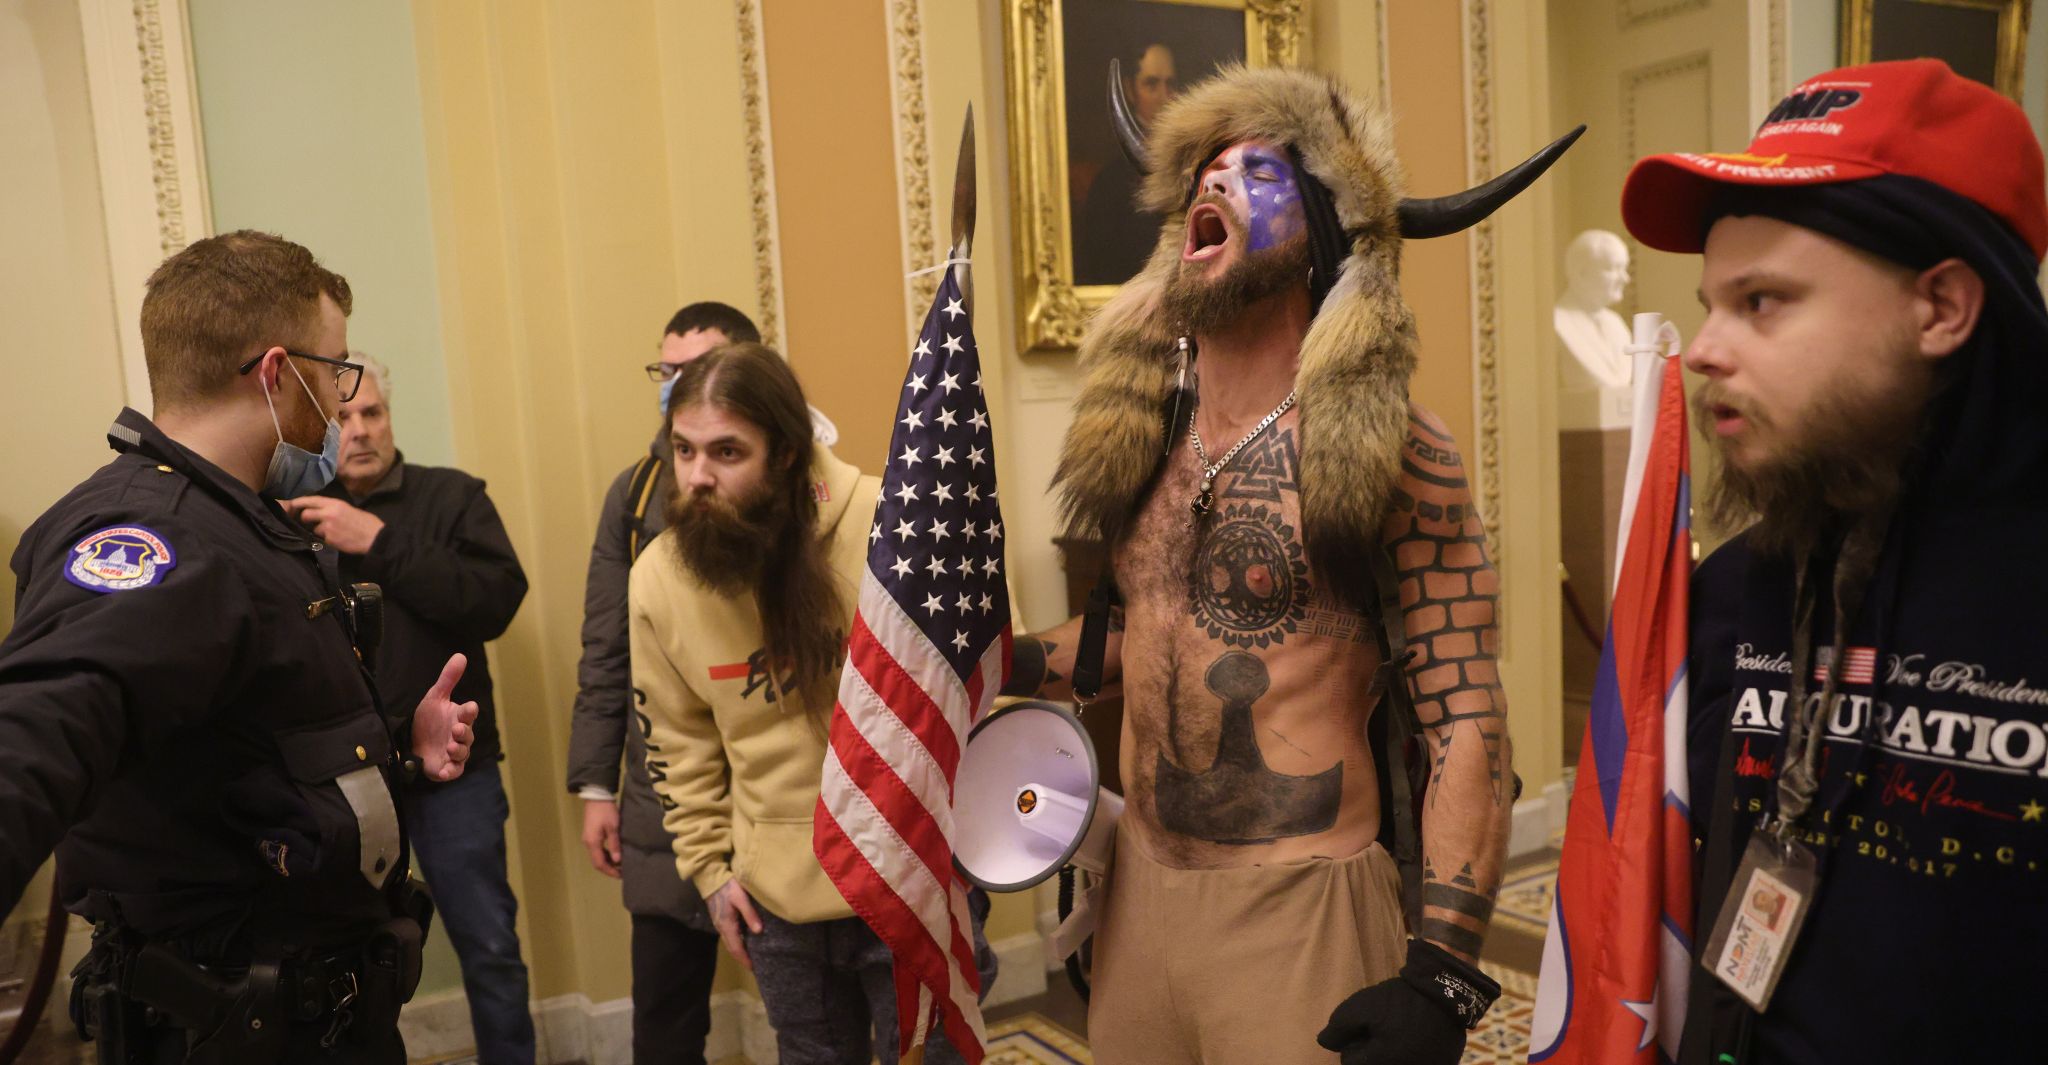 Fact check: Face-painted man with a horn peel on Capitol riot supports Trump and QAnon, not antifa